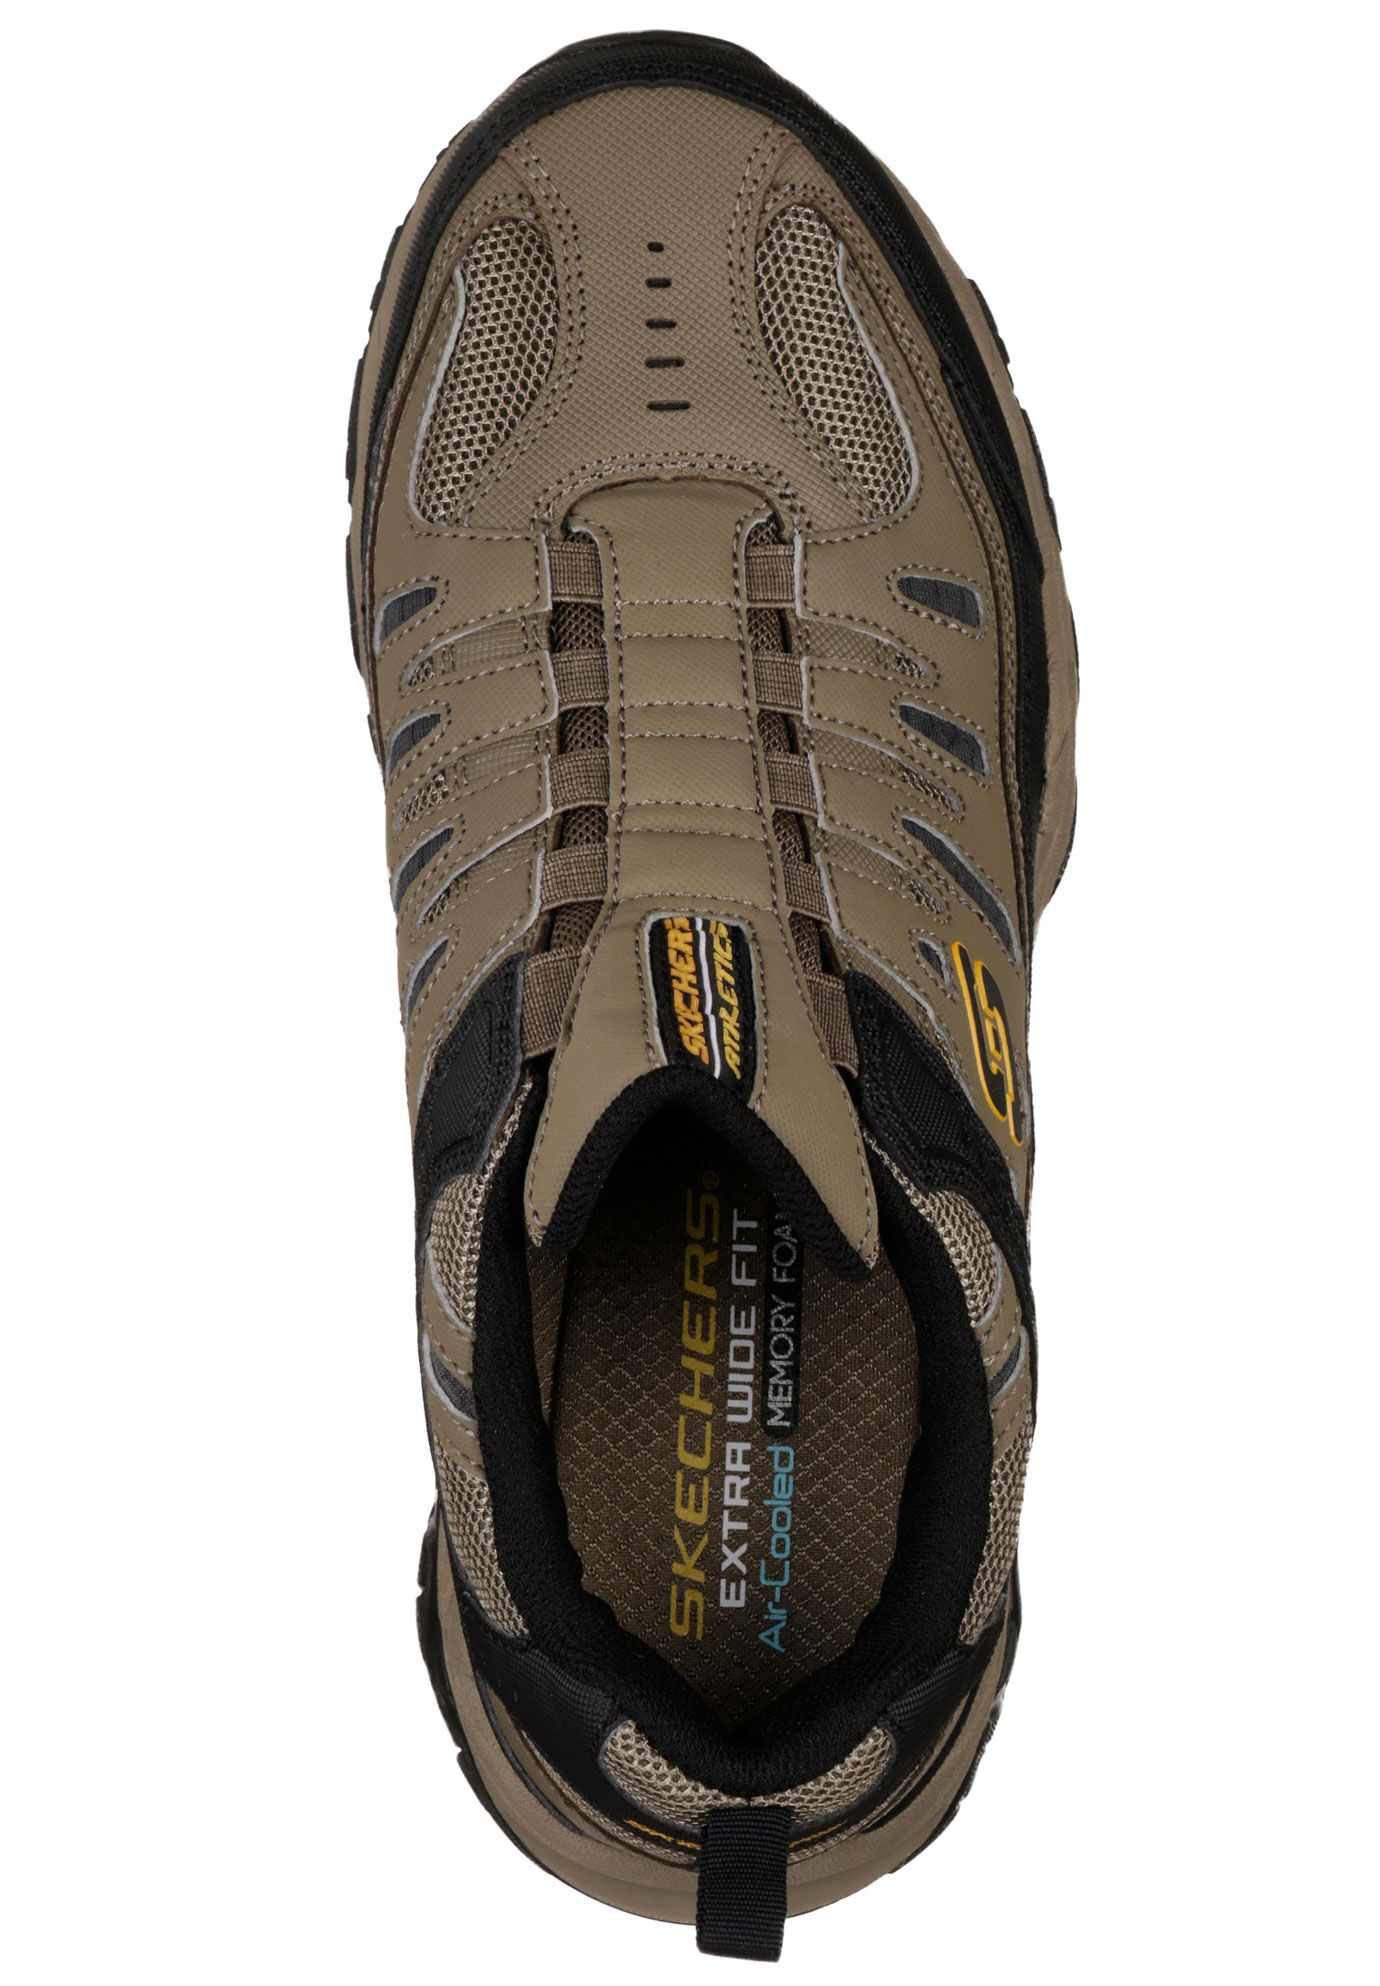 skechers extra wide fit air cooled memory foam